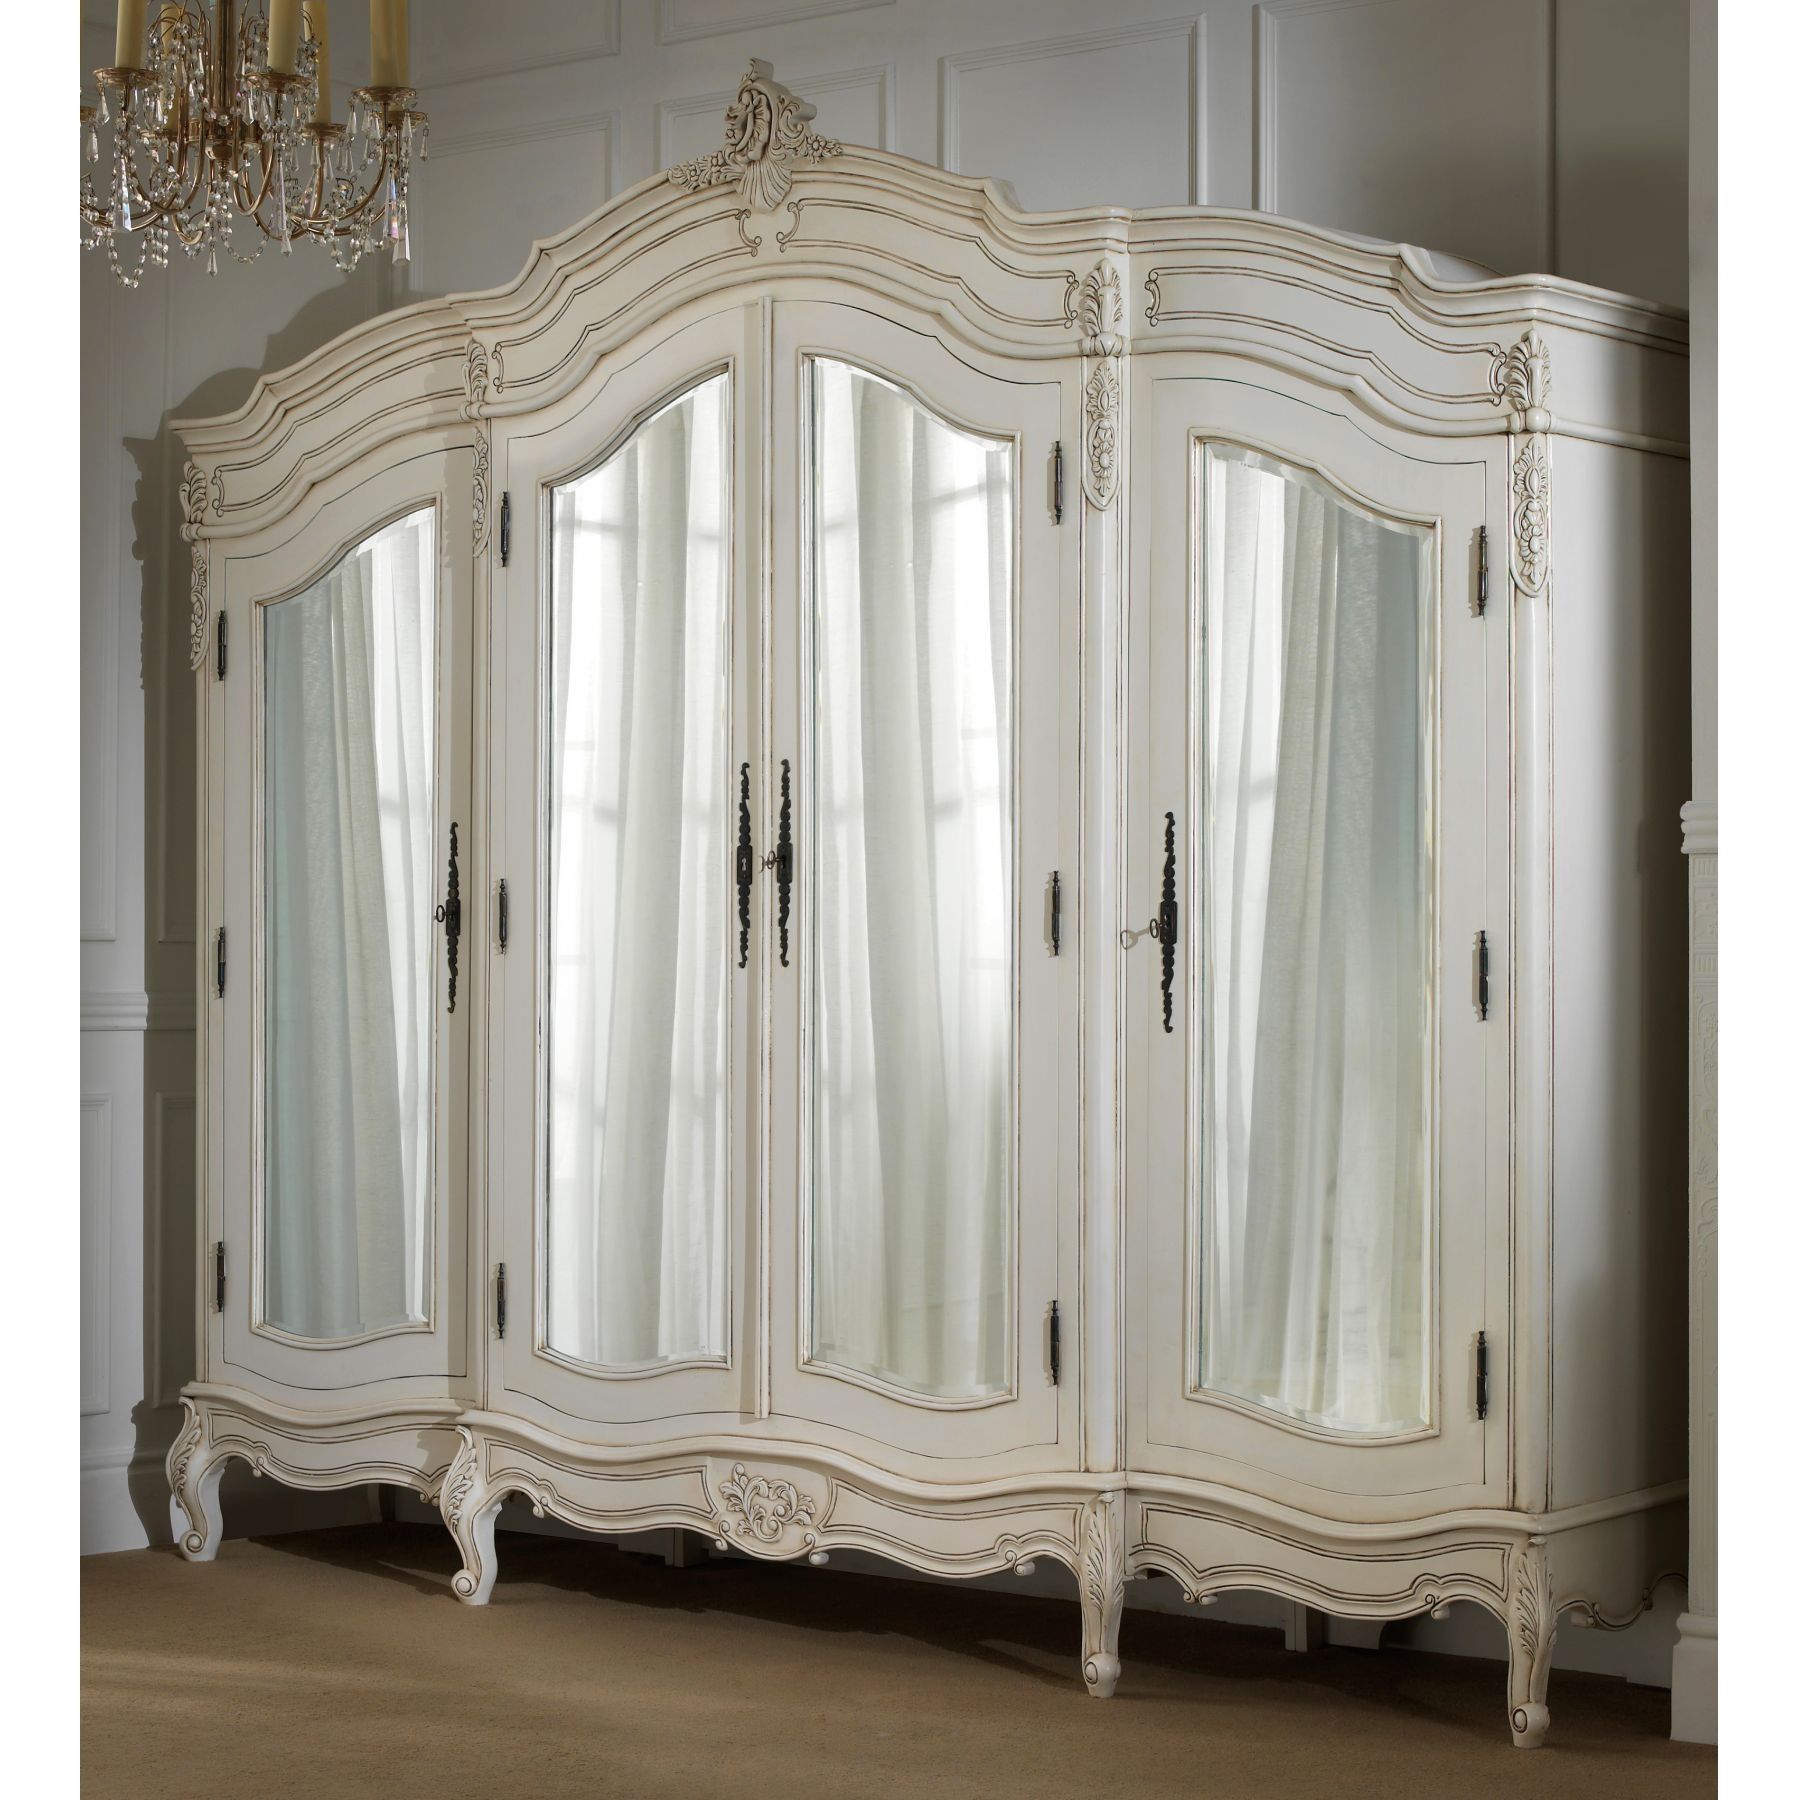 Larmadio Delle Occasioni Beautiful Furniture And Love This Intended For French Antique Mirrors For Sale (View 6 of 15)